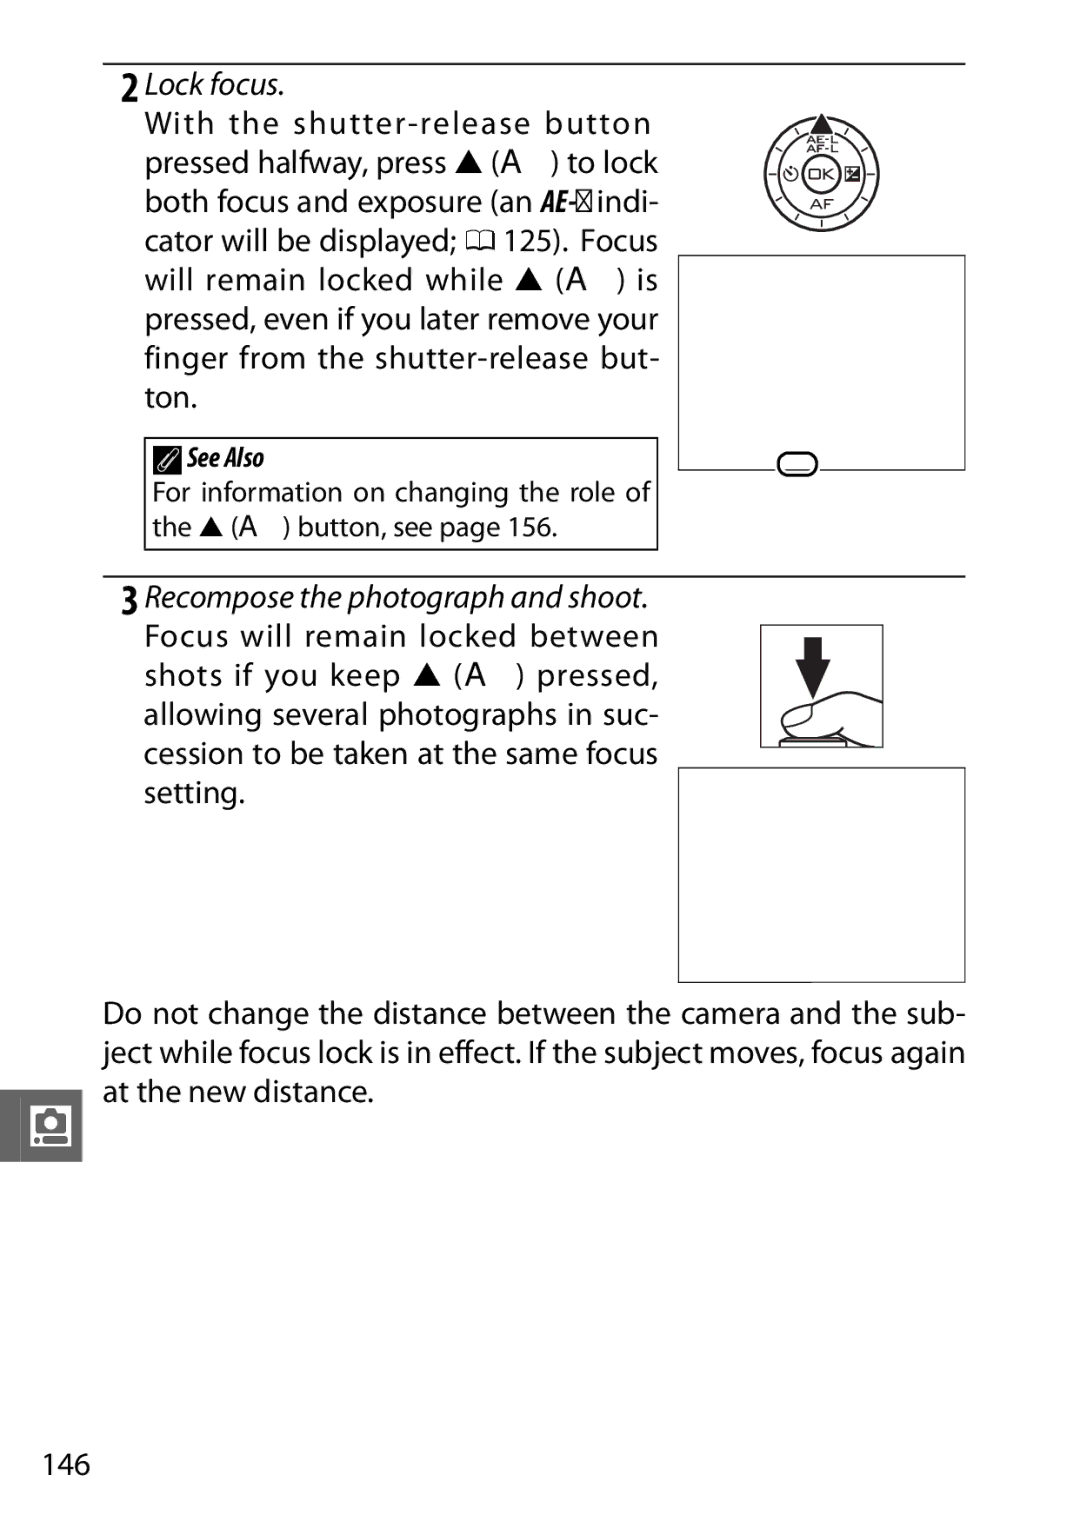 Nikon V1 manual Lock focus, Recompose the photograph and shoot, For information on changing the role of the 1 a button, see 